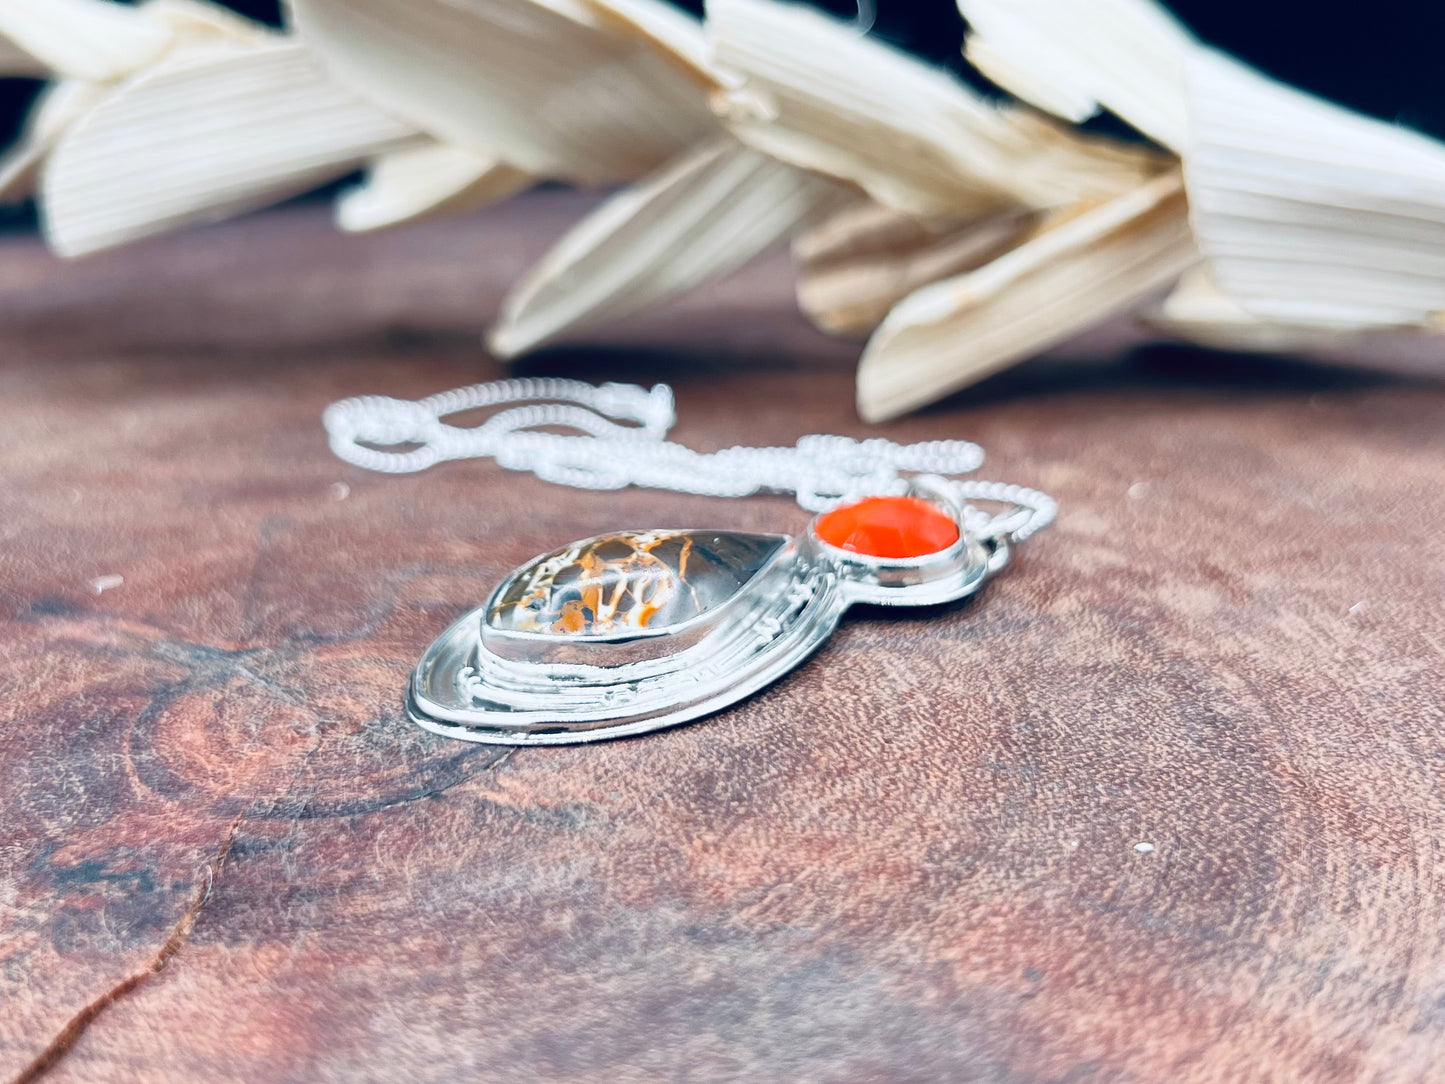 Iron Buffalo and Carnelian Sterling Silver Pendant Necklace